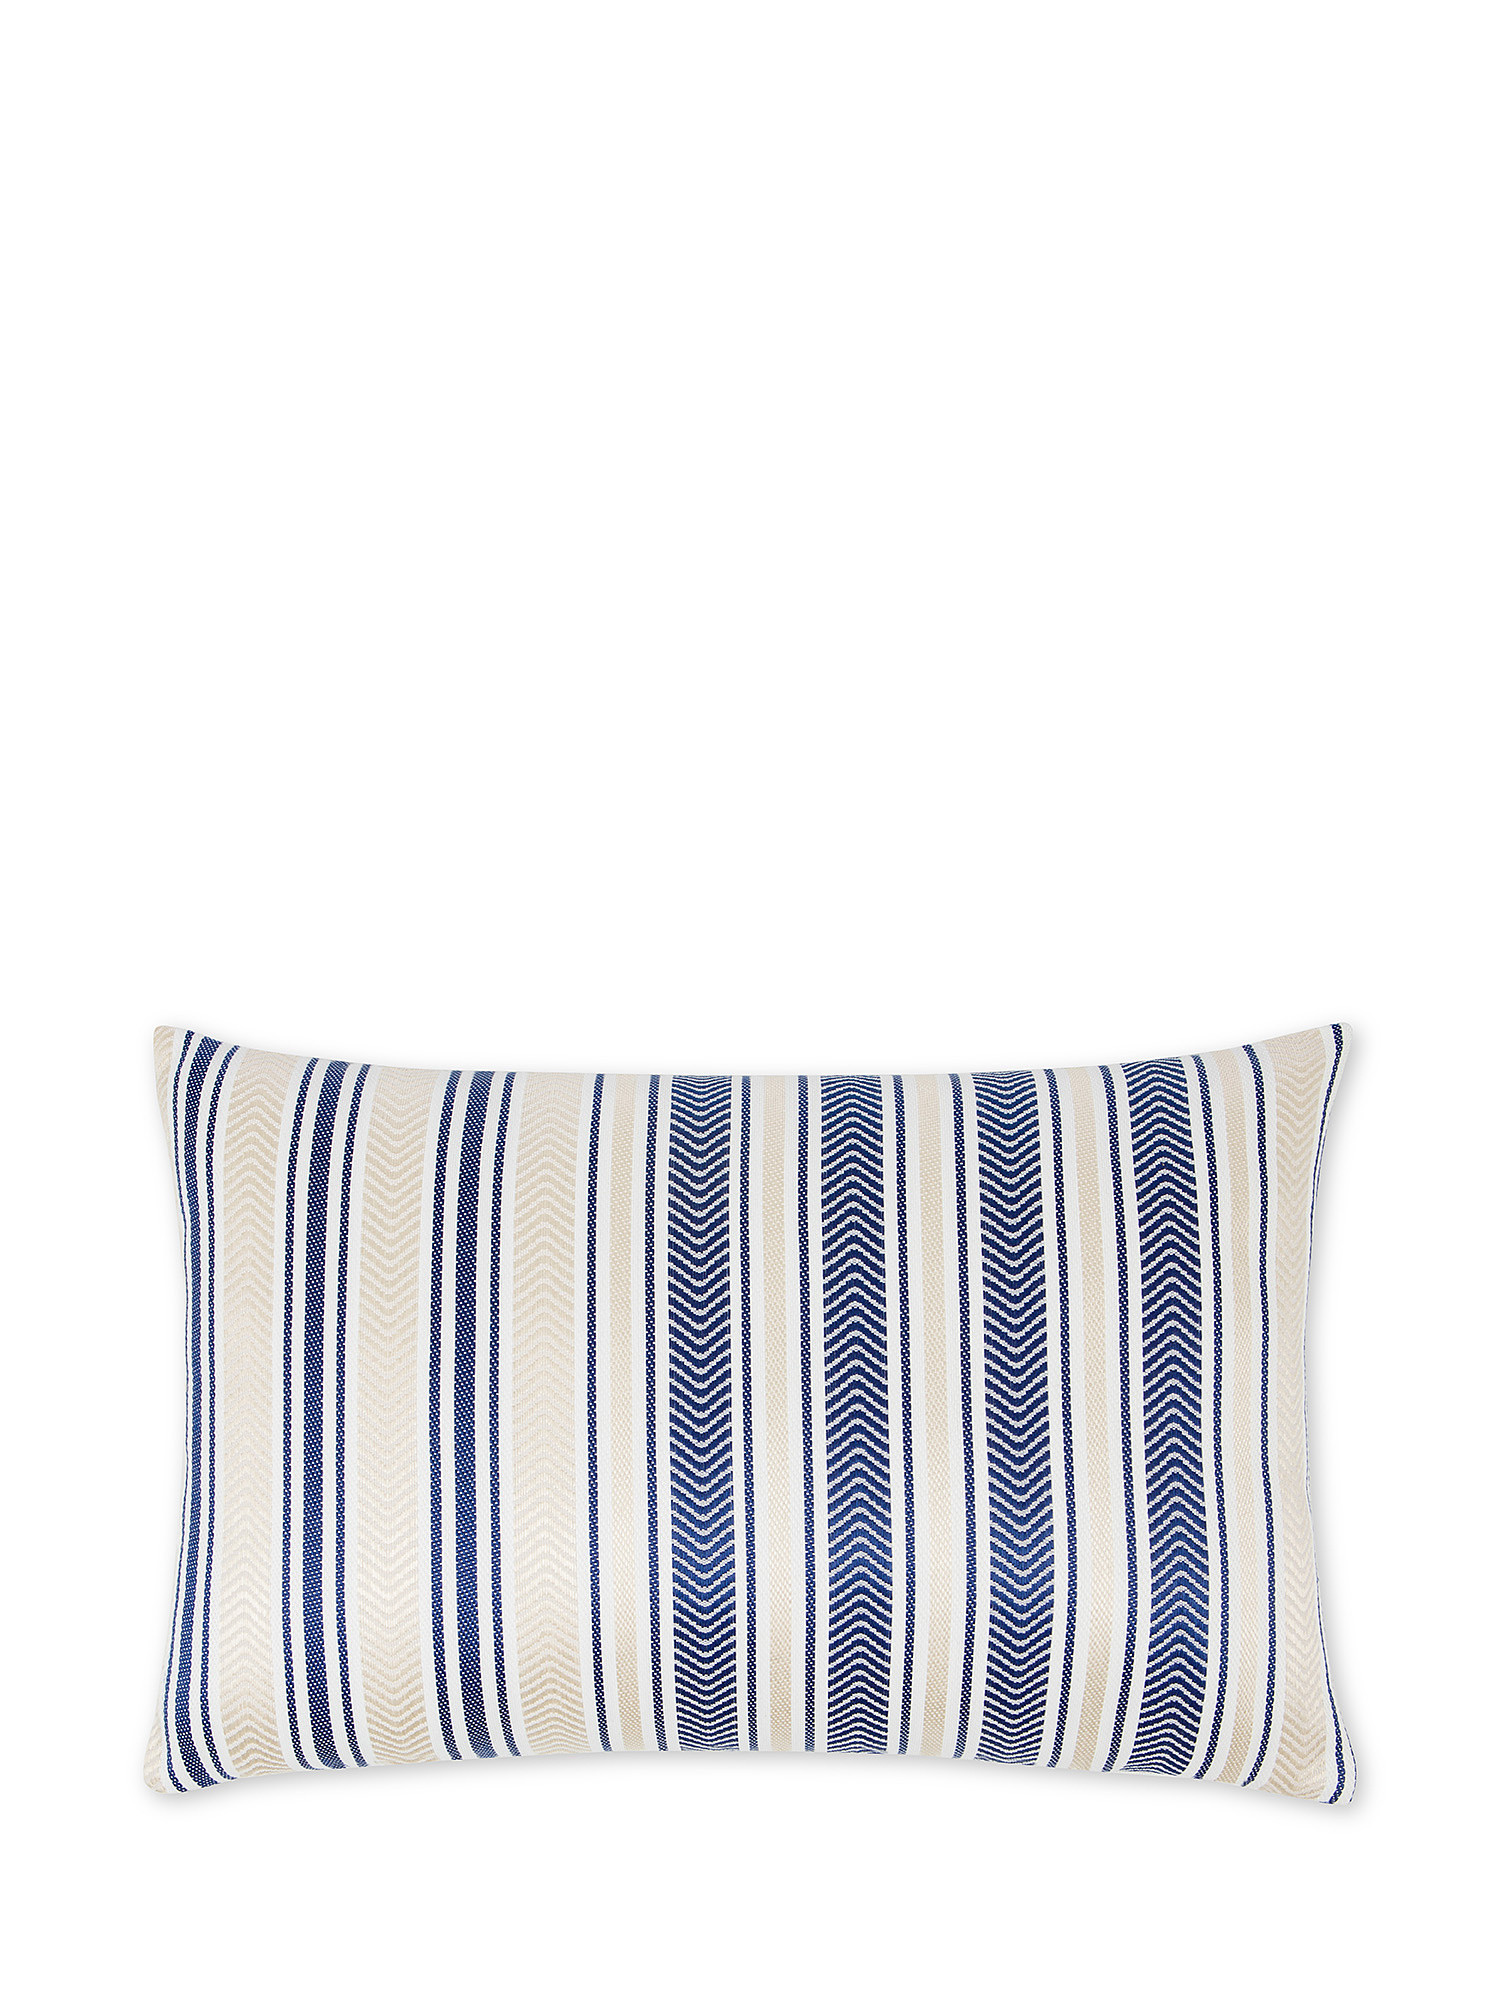 35x55 cm outdoor cushion with striped pattern, with zip and padding., Beige, large image number 0